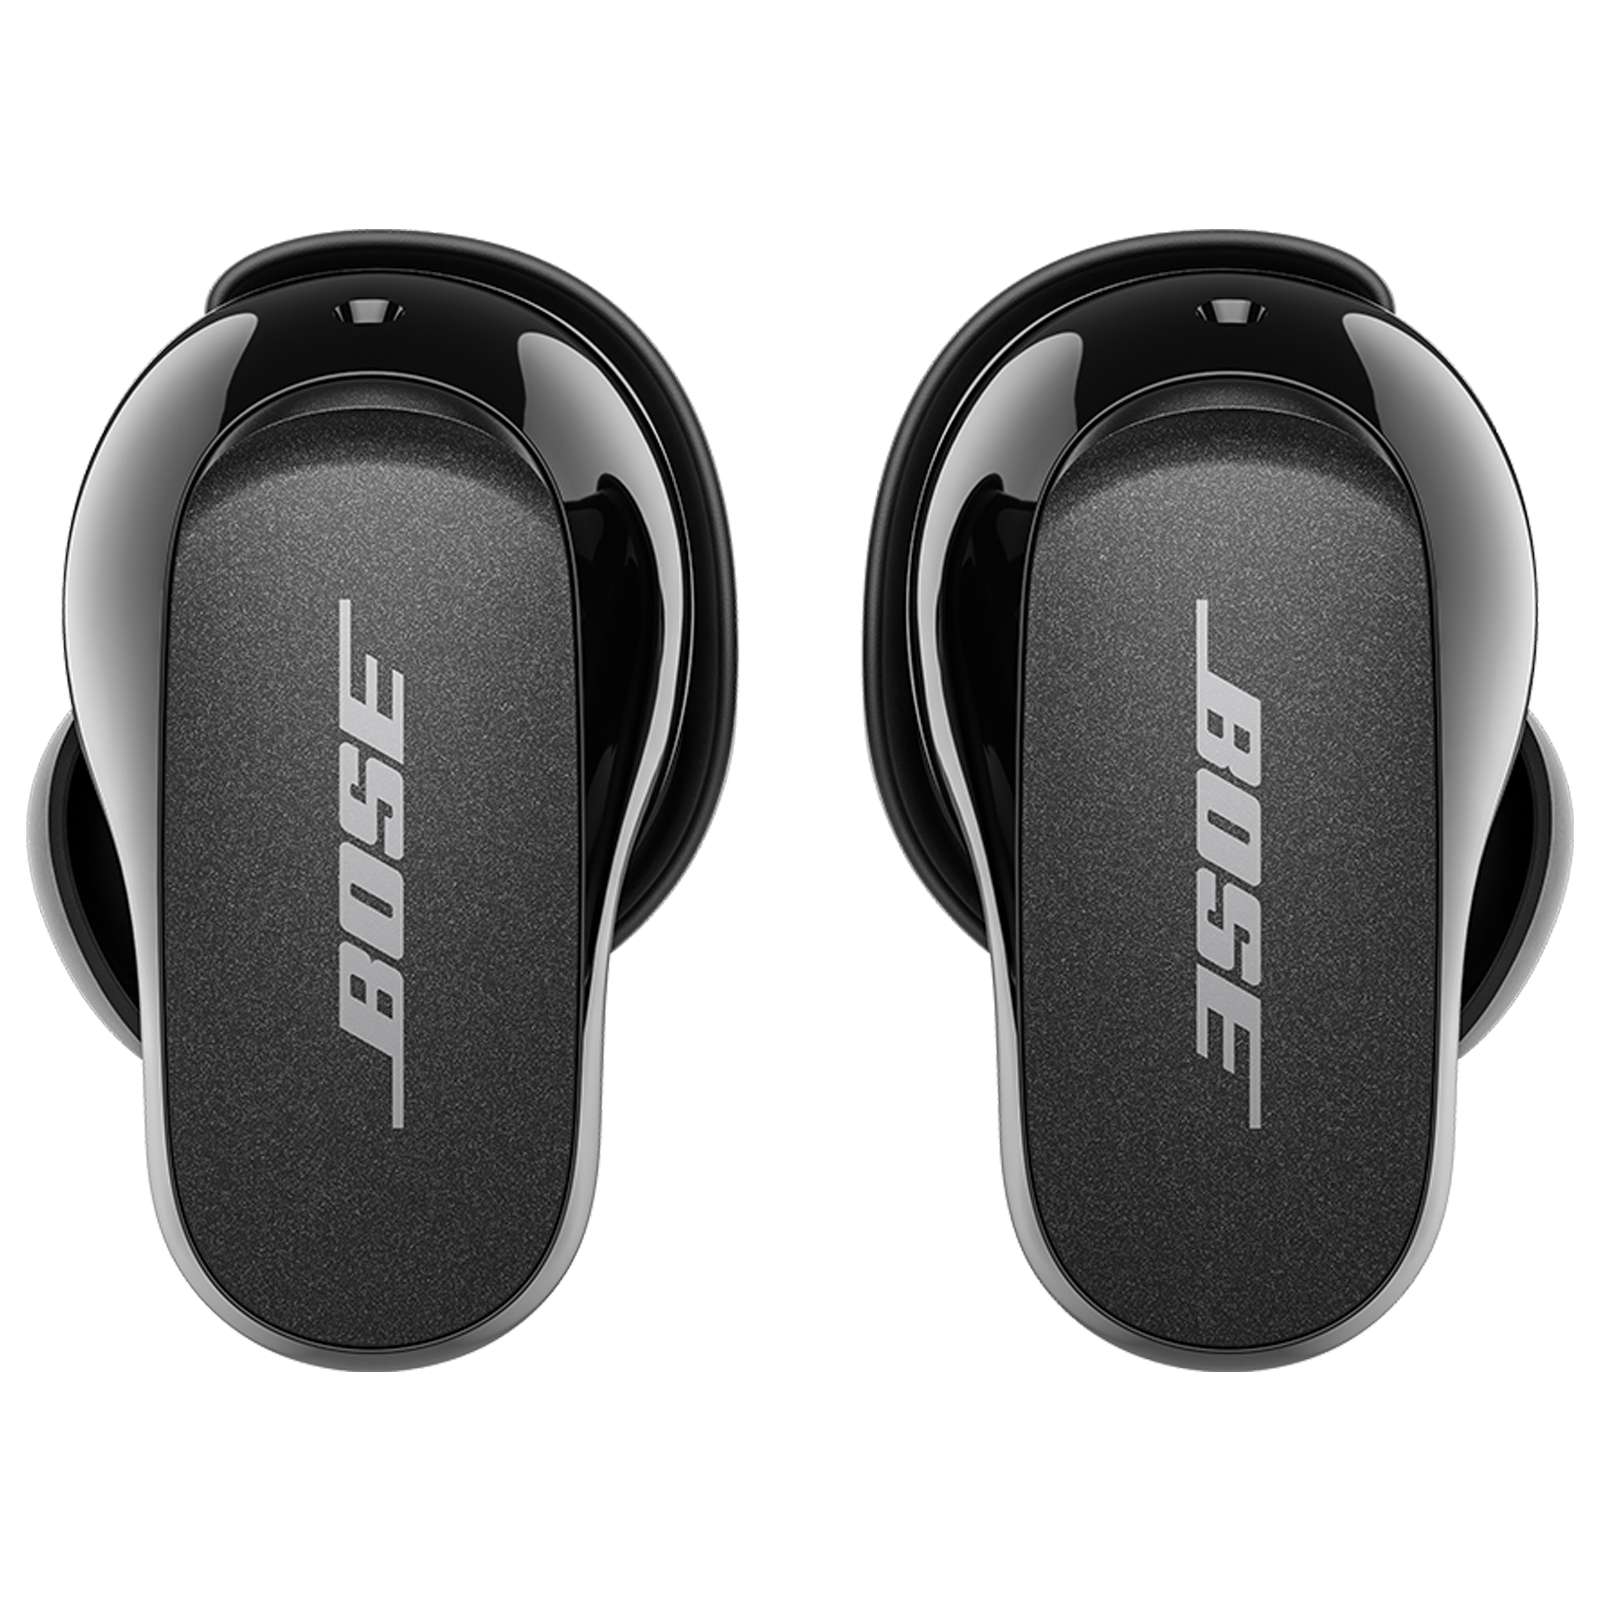 Buy Bose QuietComfort II TWS Earbuds with Active Noise Cancellation (IPX4 Water Resistant, Up to 6 Hours Playback, Triple Black) Online - Croma